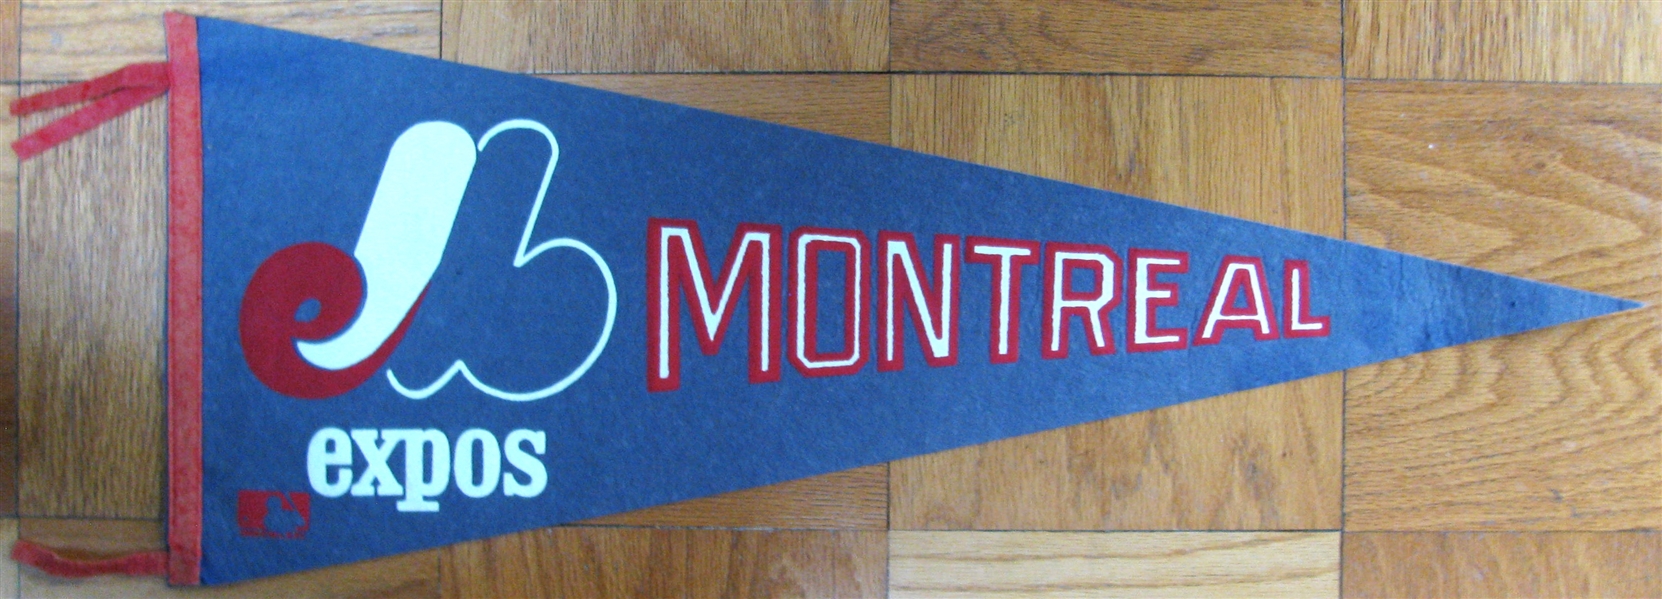 1969 MONTREAL EXPOS PENNANT - 1st YEAR OF FRANCHISE